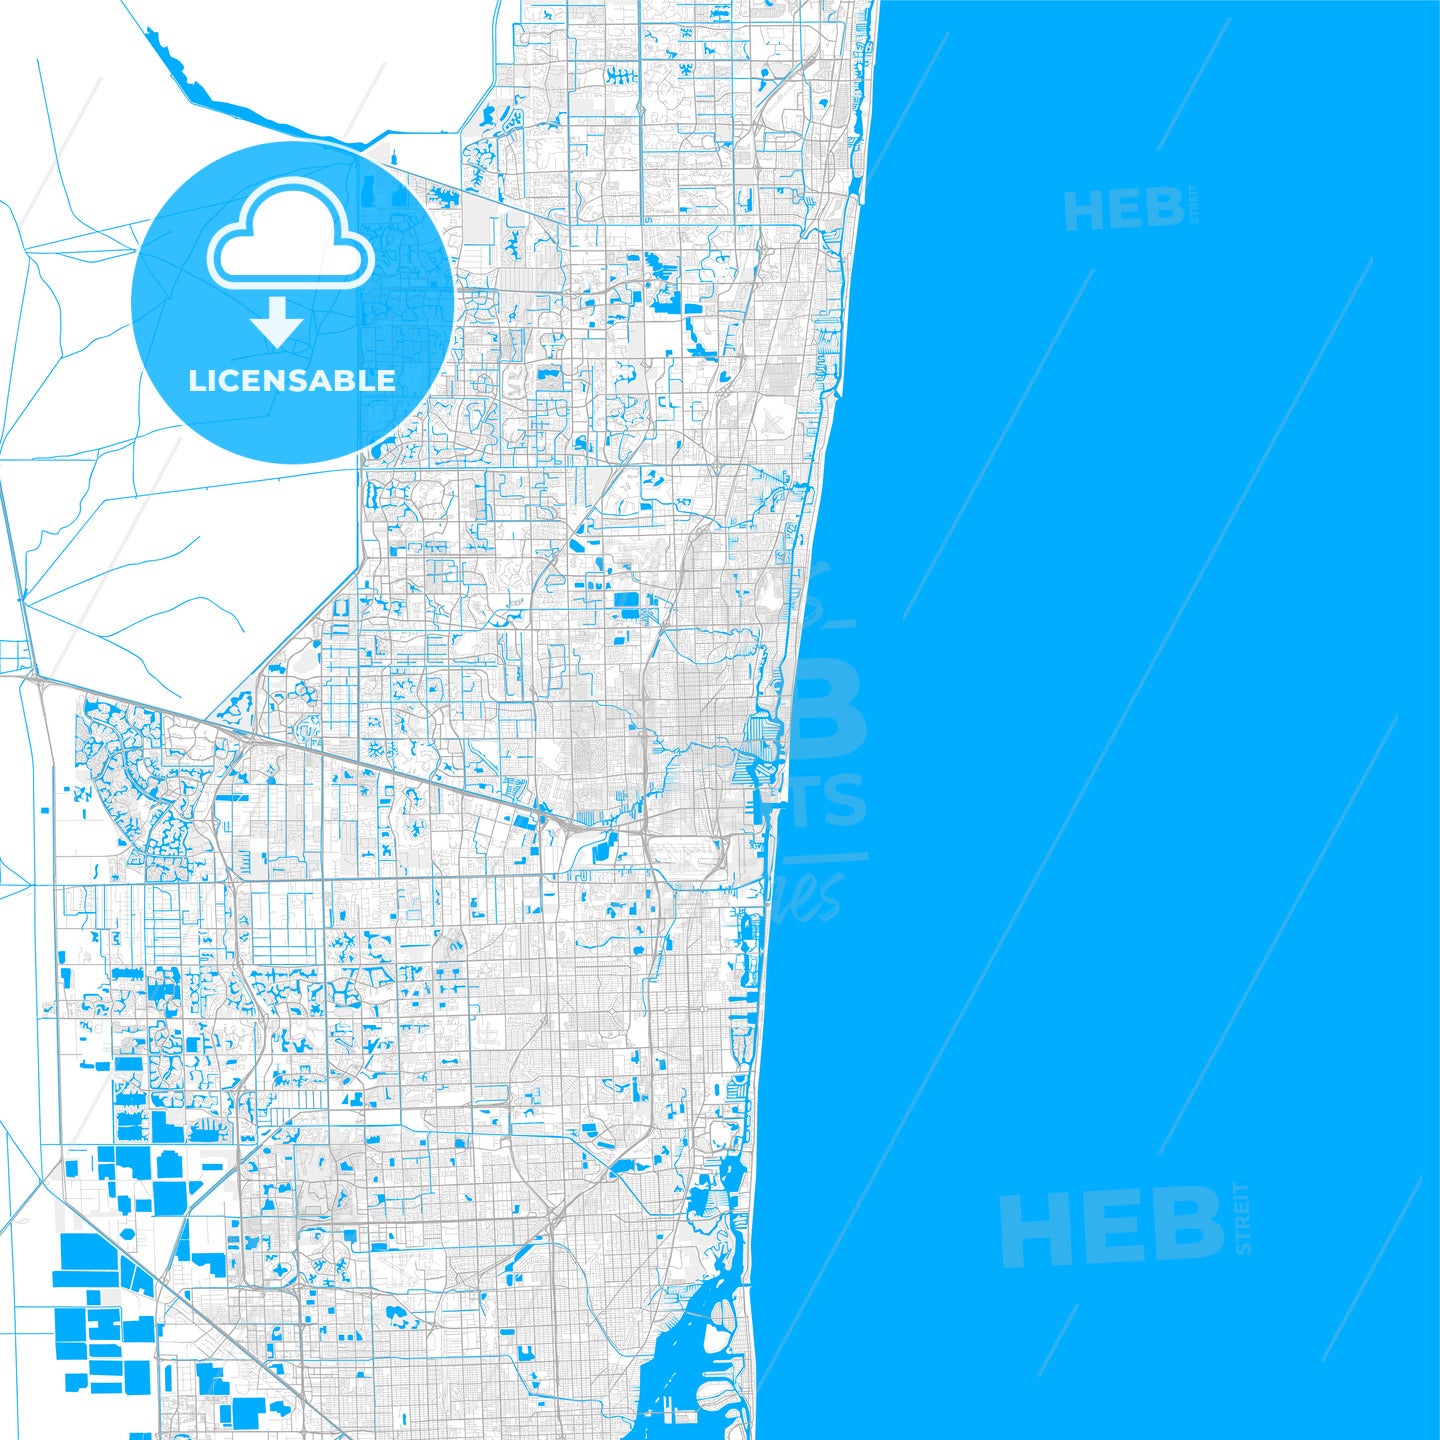 Rich detailed vector map of Fort Lauderdale, Florida, USA